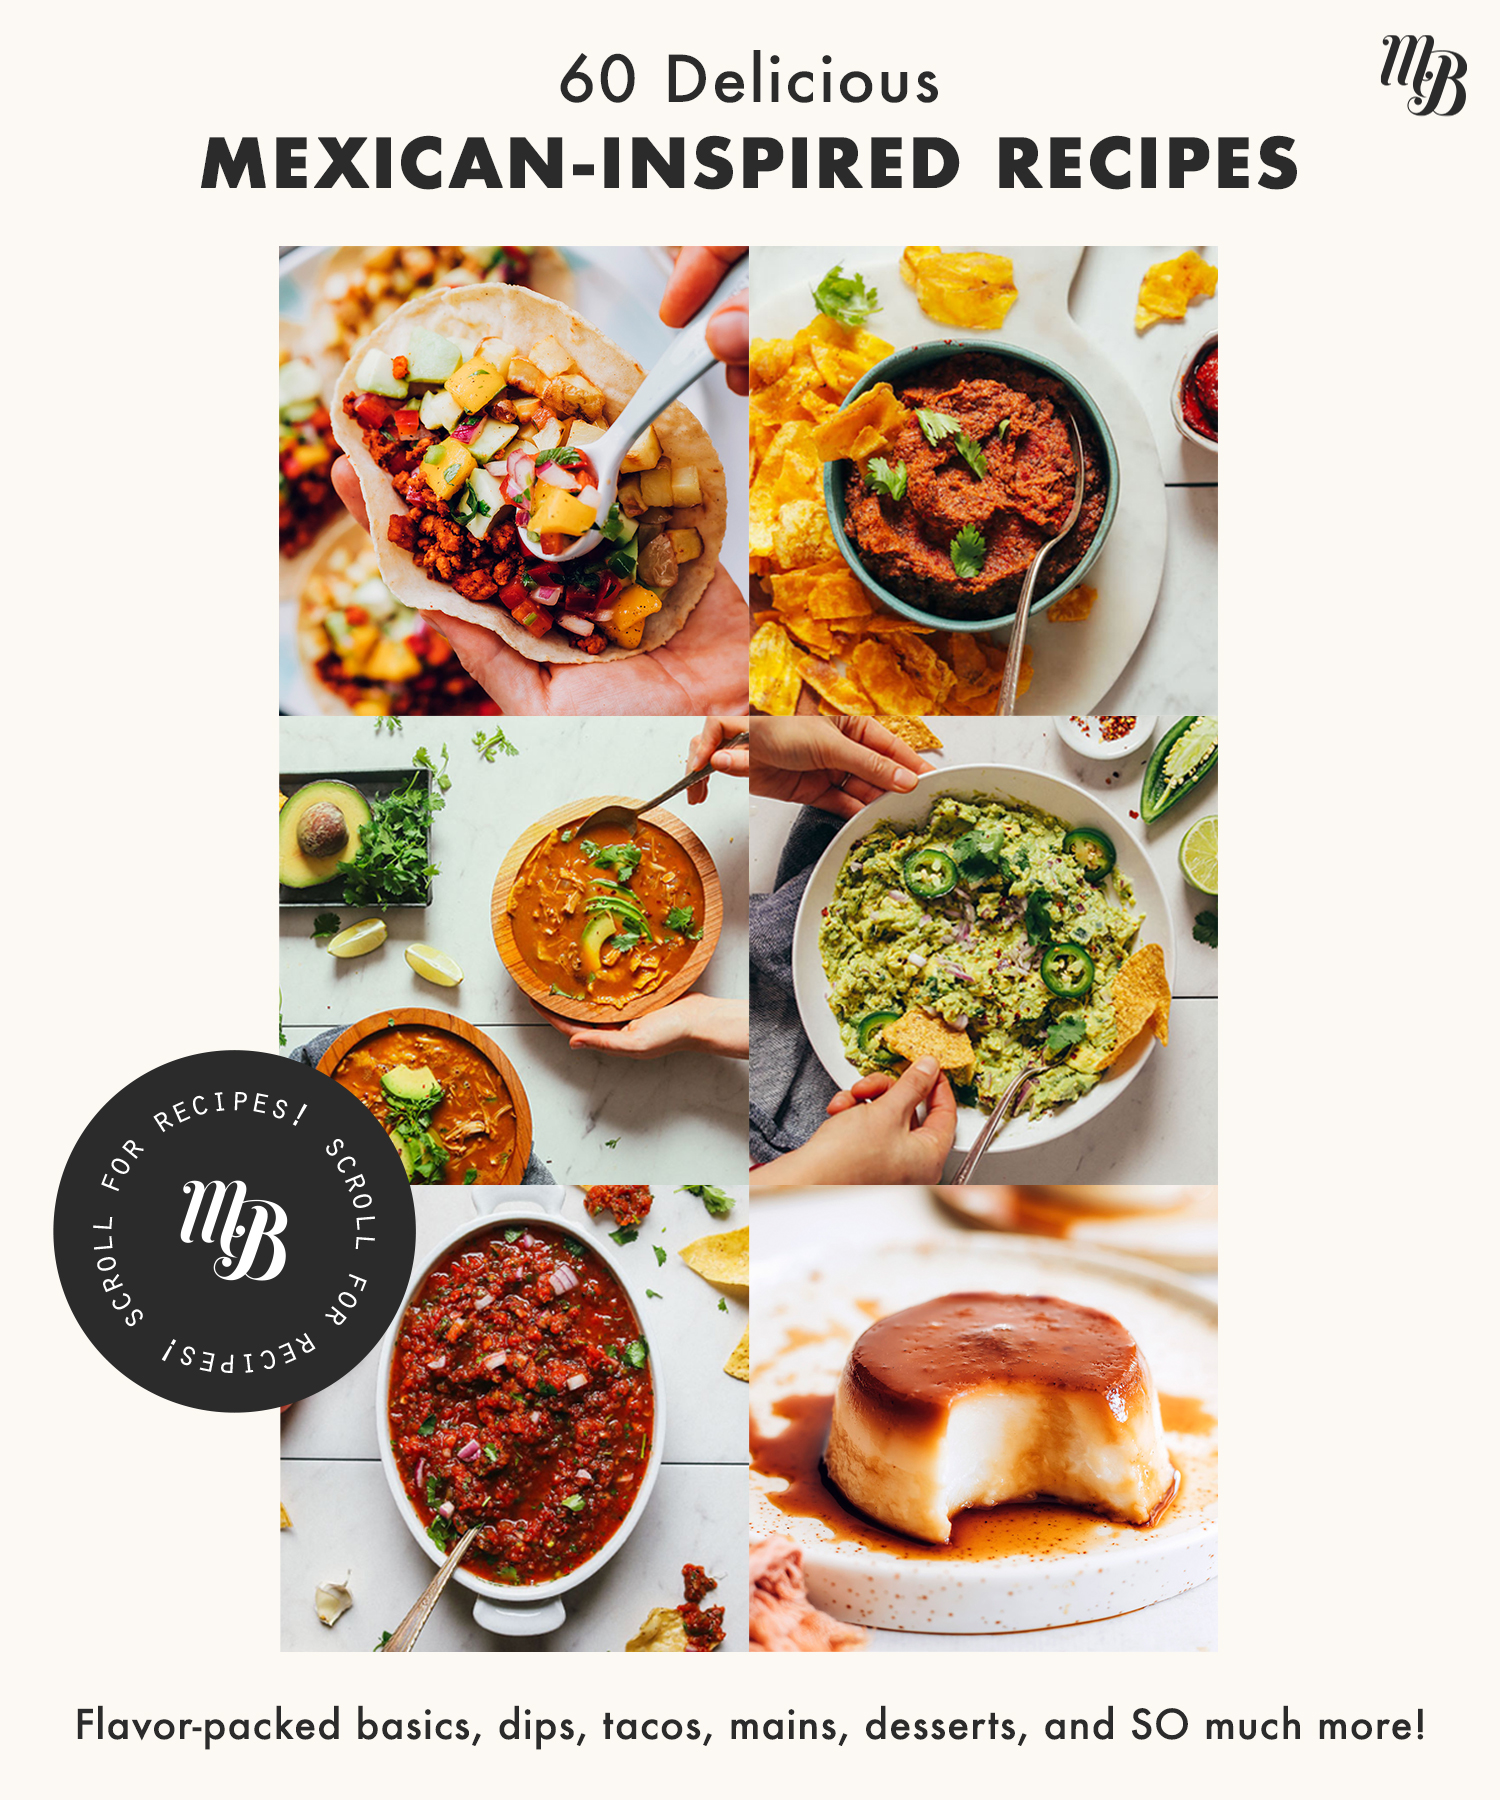 Assortment of Mexican-inspired recipes including tacos, dips, soups, desserts, and more